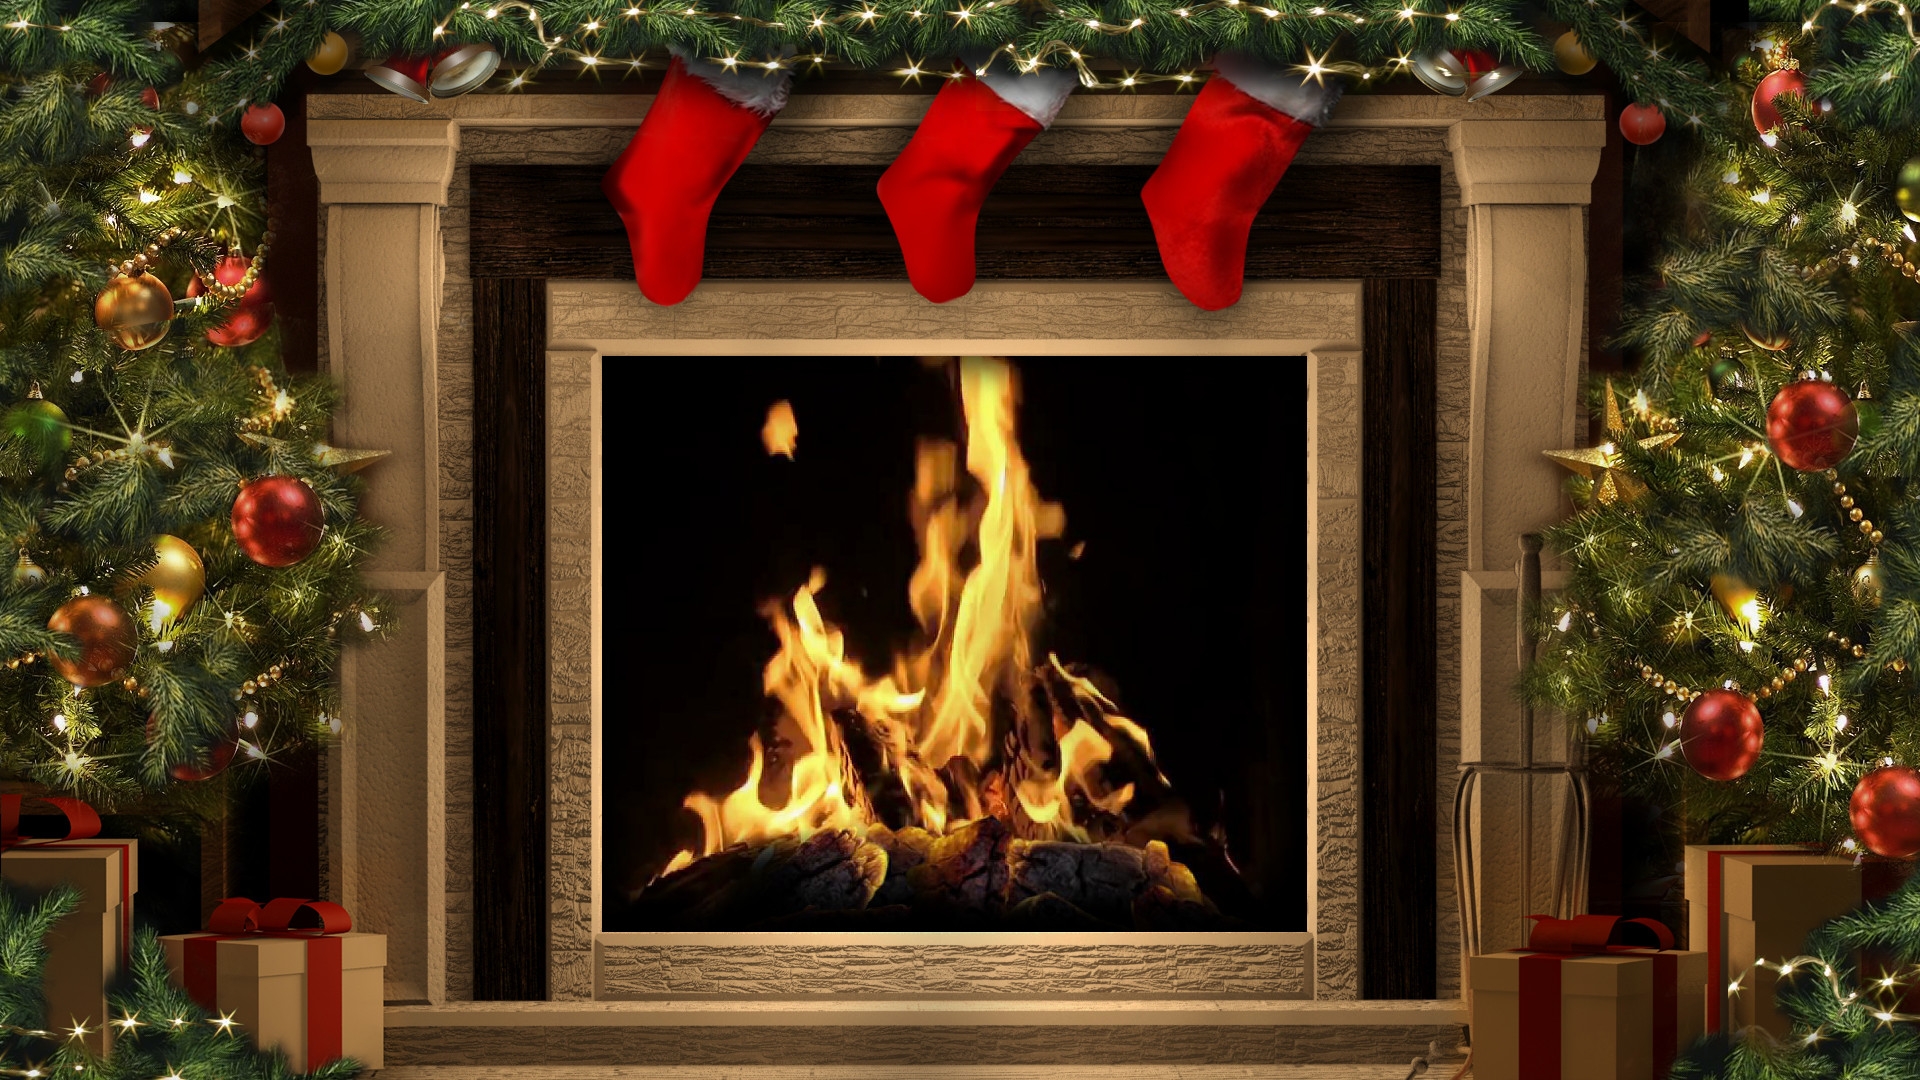 Christmas Fireplace Pics
 Amazing Christmas Fireplaces App Ranking and Store Data